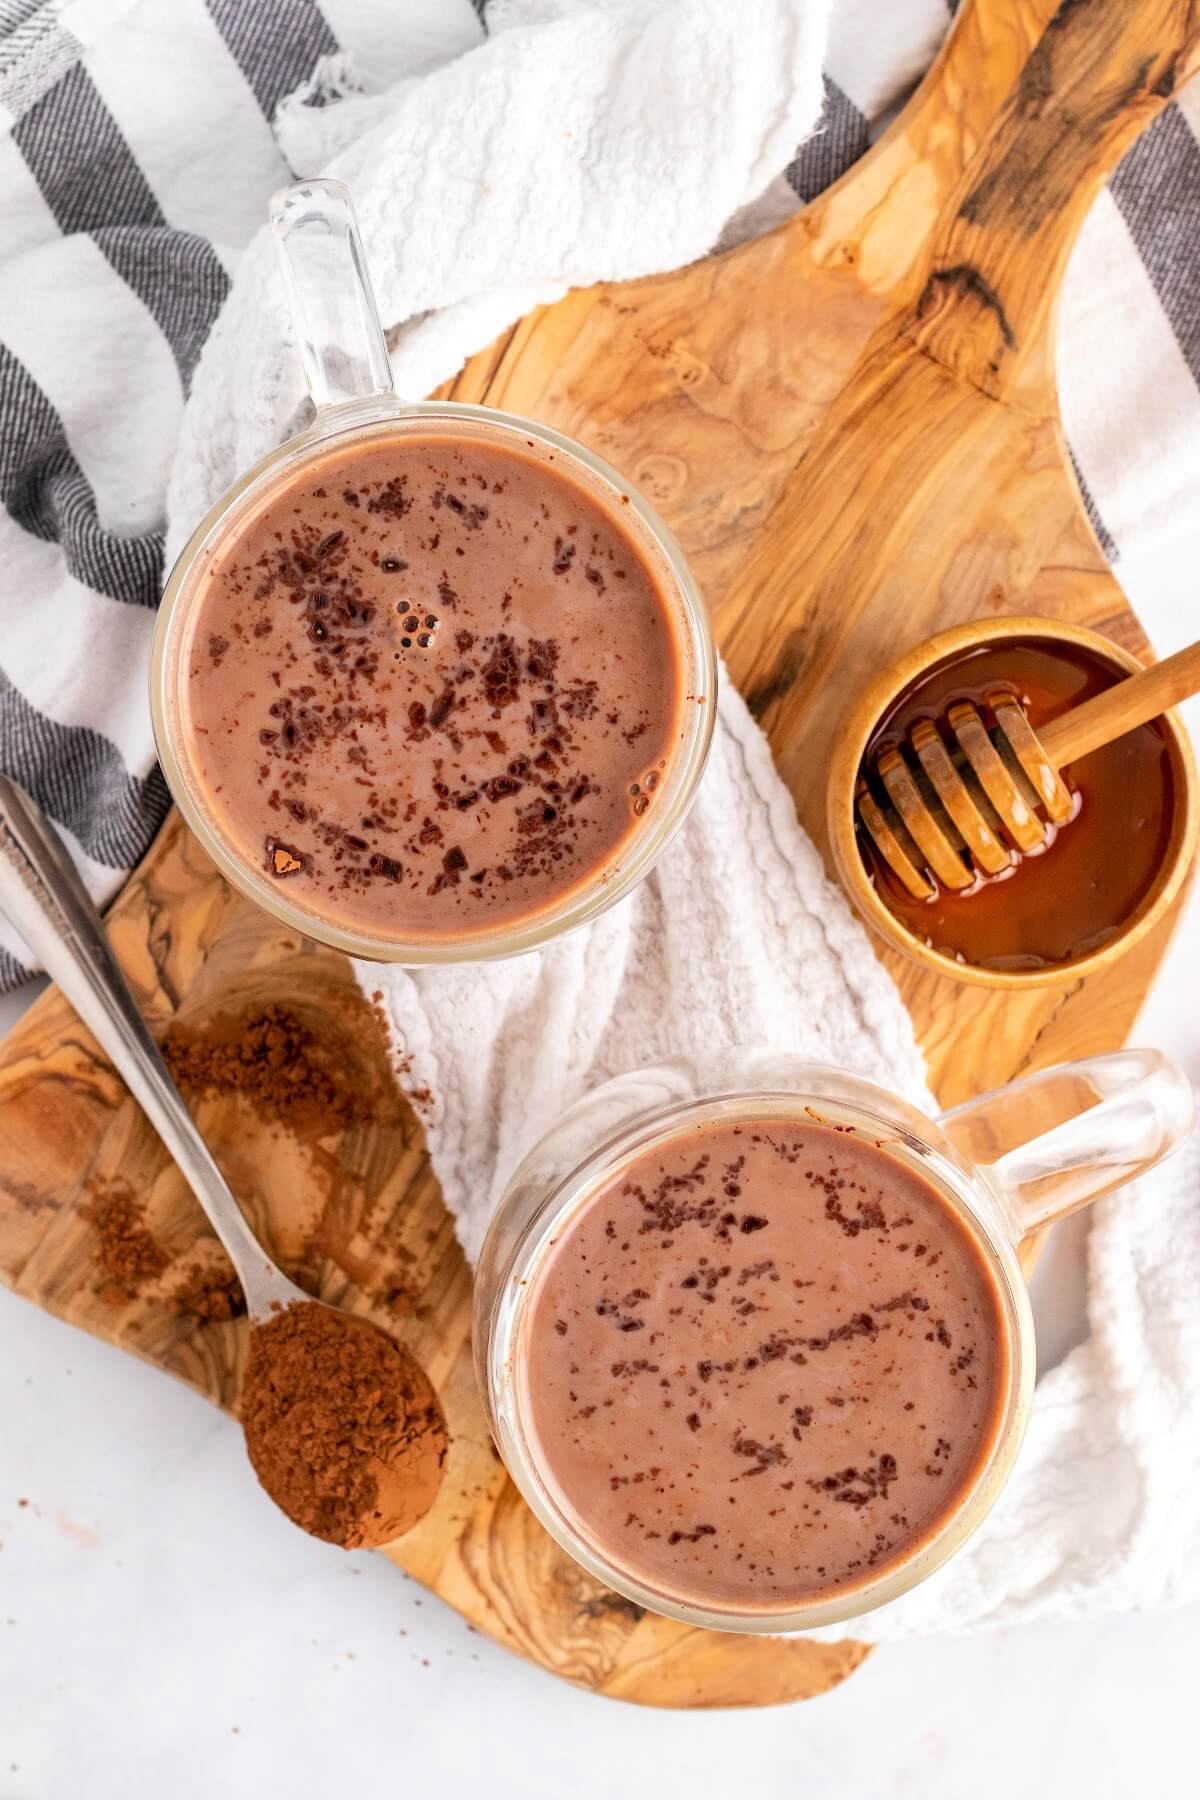 Two glass mugs filled with hot chocolate and topped with chocolate shavings sitting on a wooden cutting board with a spoon full of cocoa powder and a small bowl full of honey with a honey dipper next to the hot chocolates.